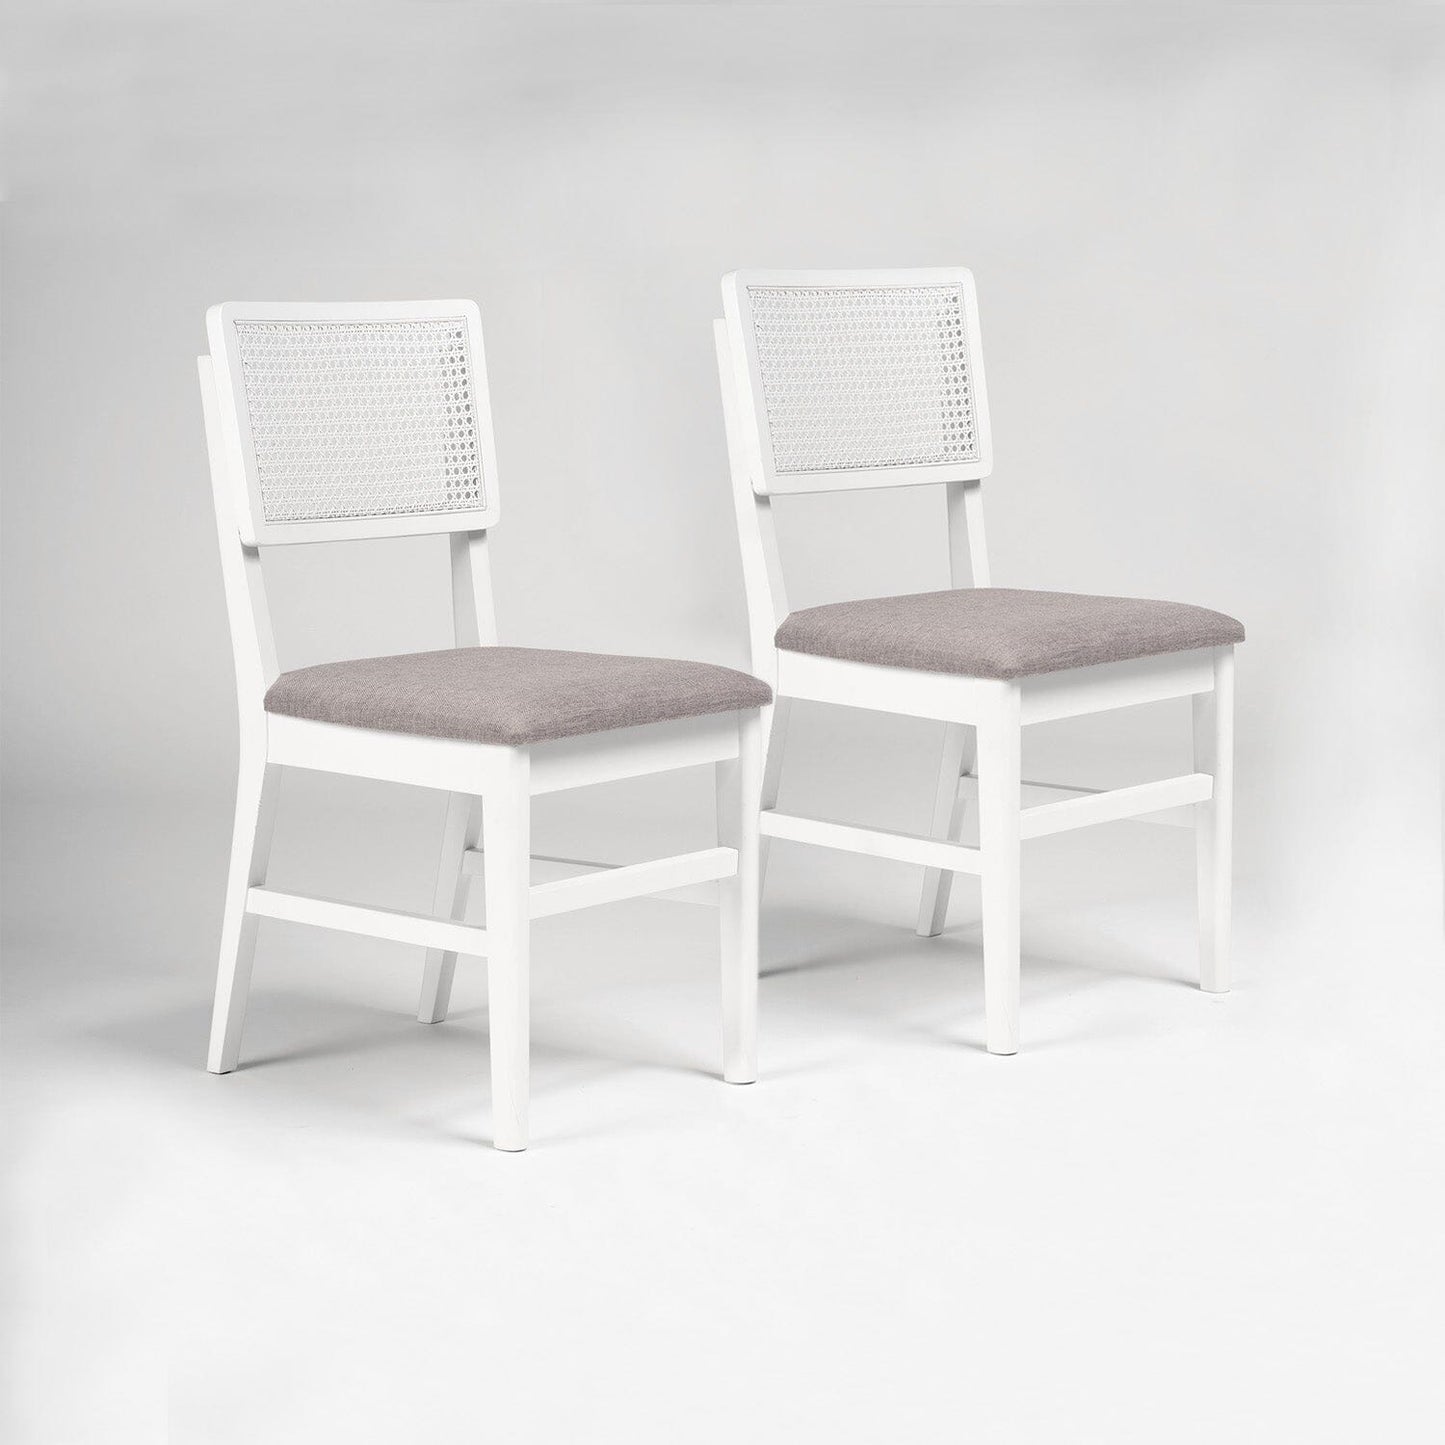 Charlie dining chair - set of 2 - white